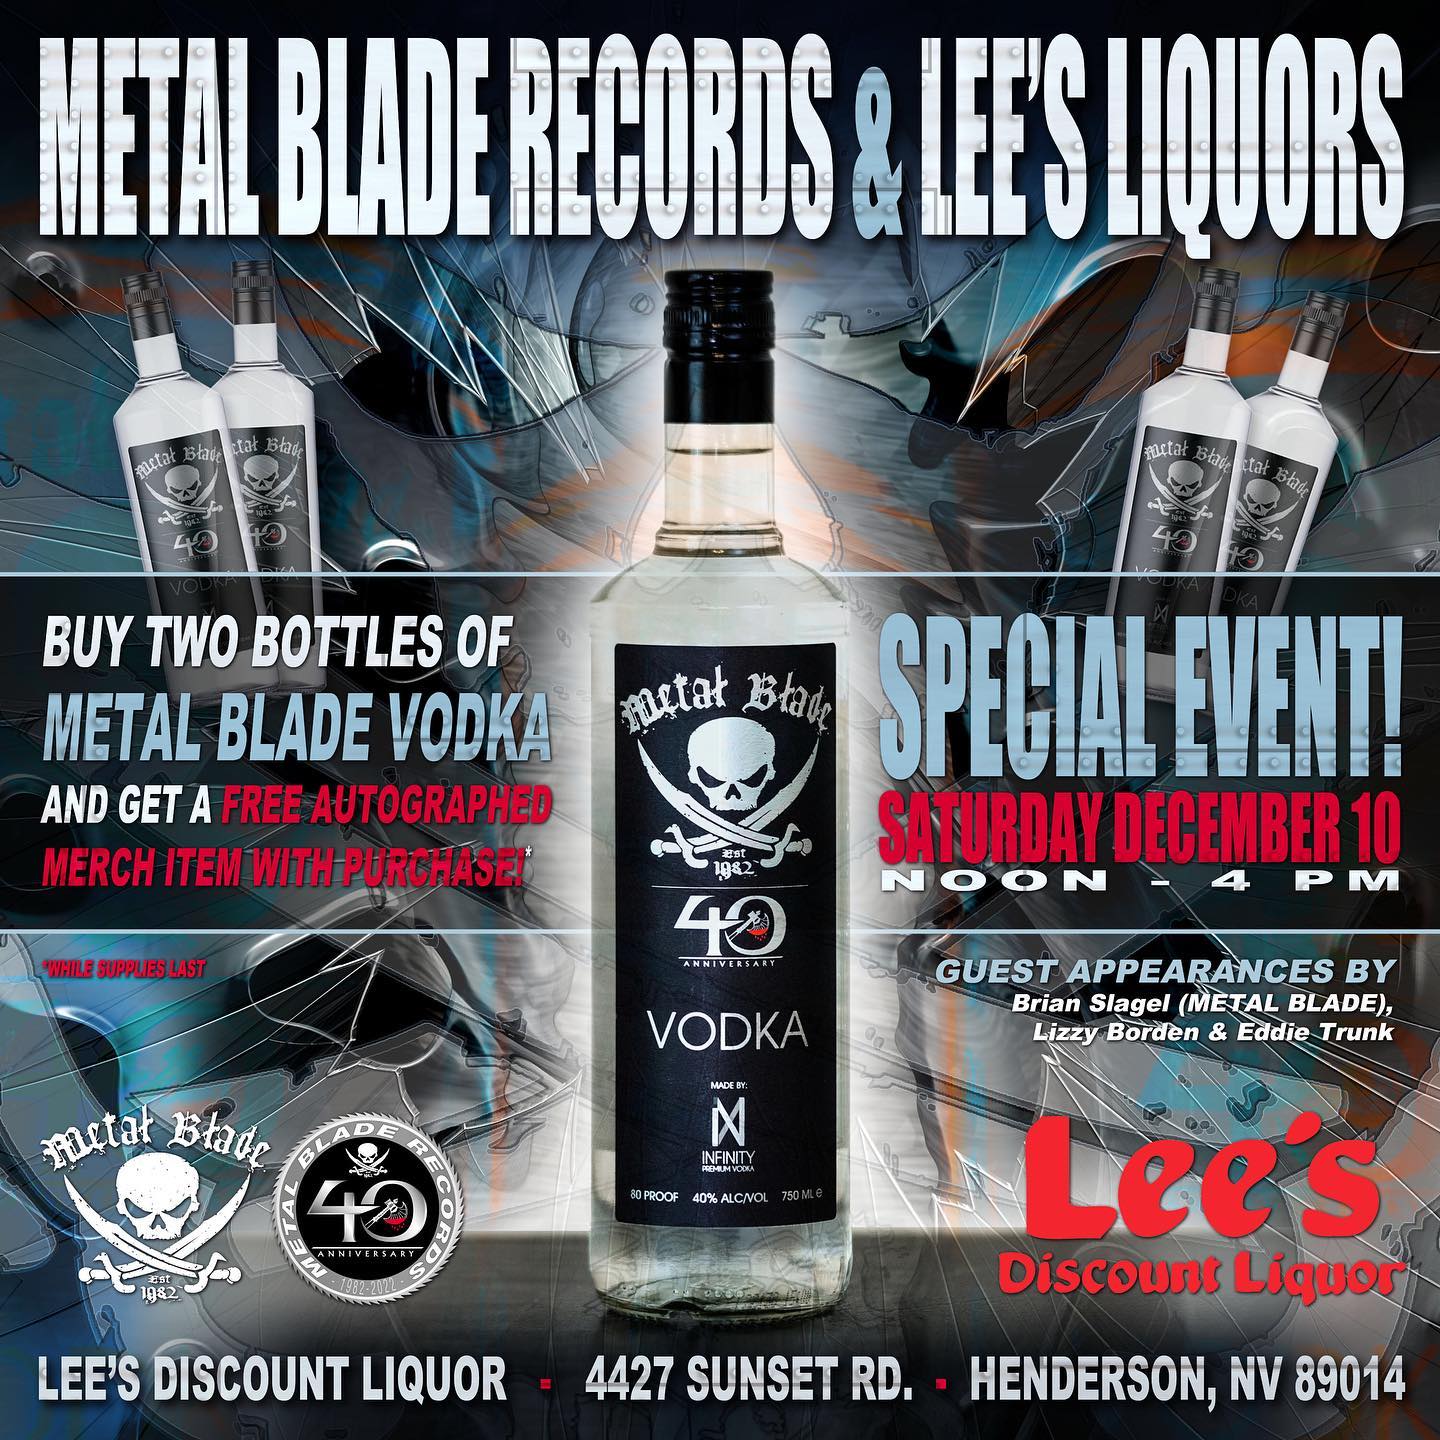 METAL BLADE RECORDS Vodka Event Feature